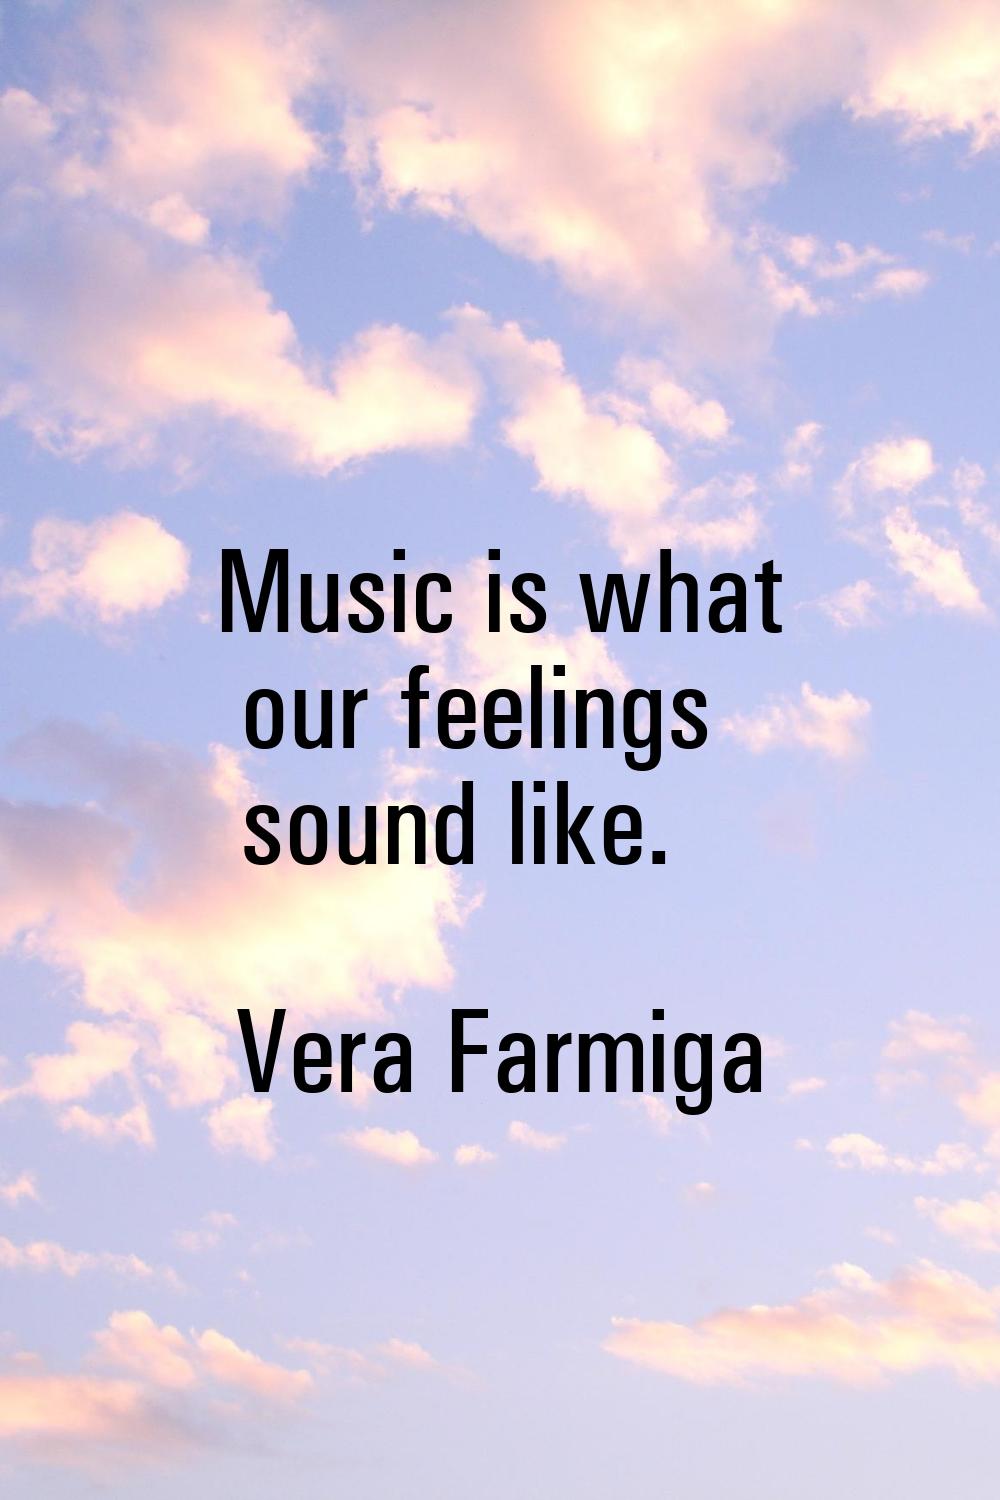 Music is what our feelings sound like.